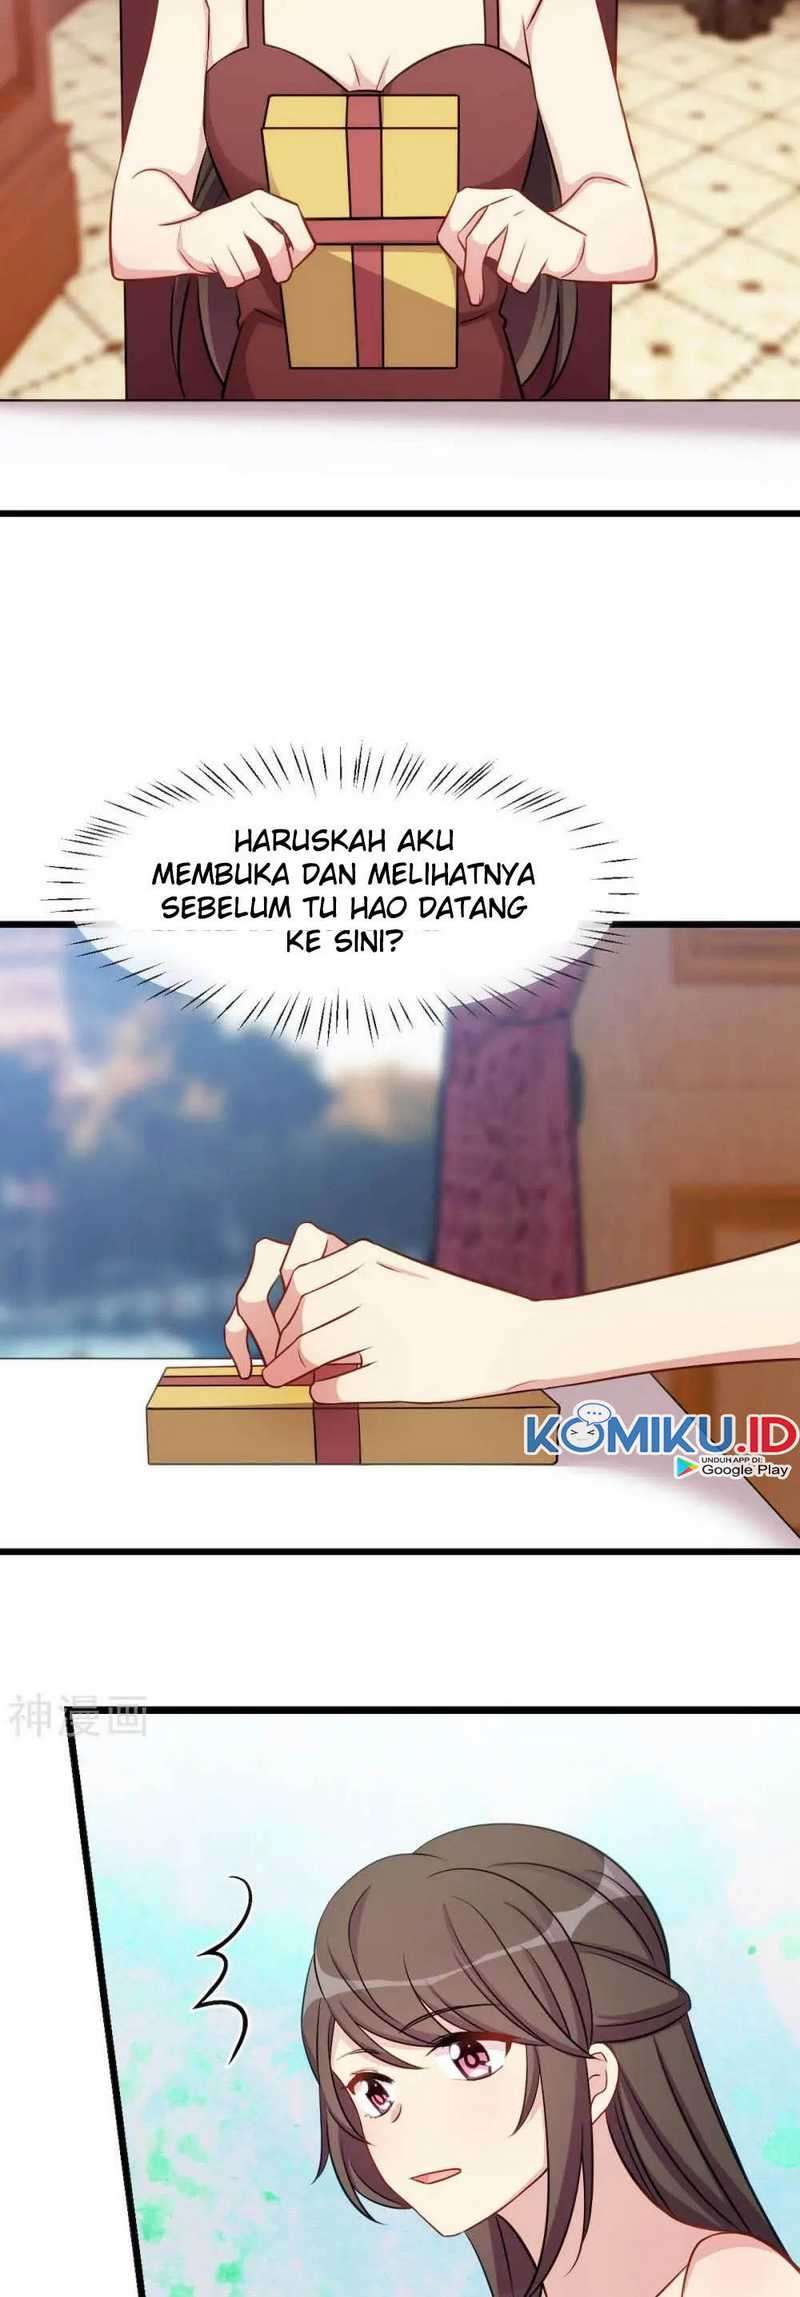 Ceo’s Sudden Proposal Chapter 285